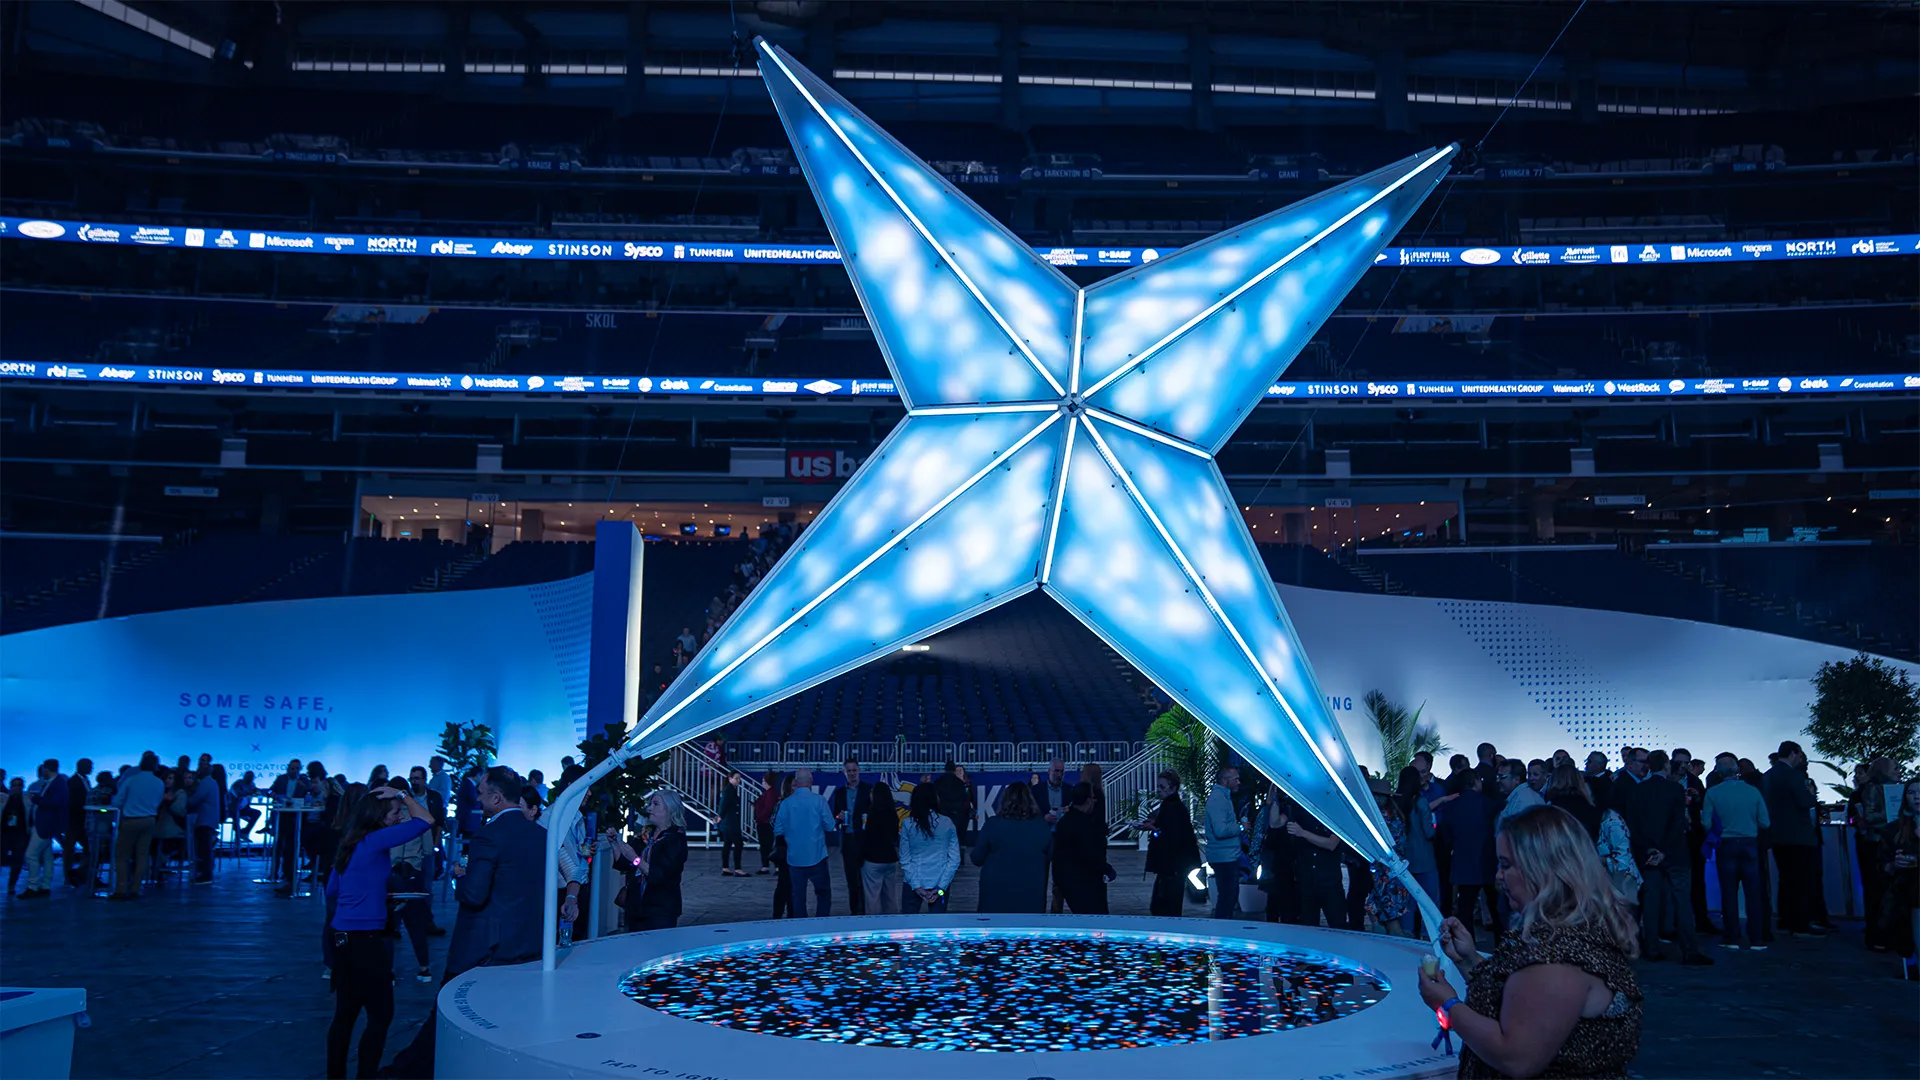 The LED sculpture radiates light from the center, its base LED screen displaying dynamic particle visuals. Around it, event attendees gather in a semicircle, captivated by the display.